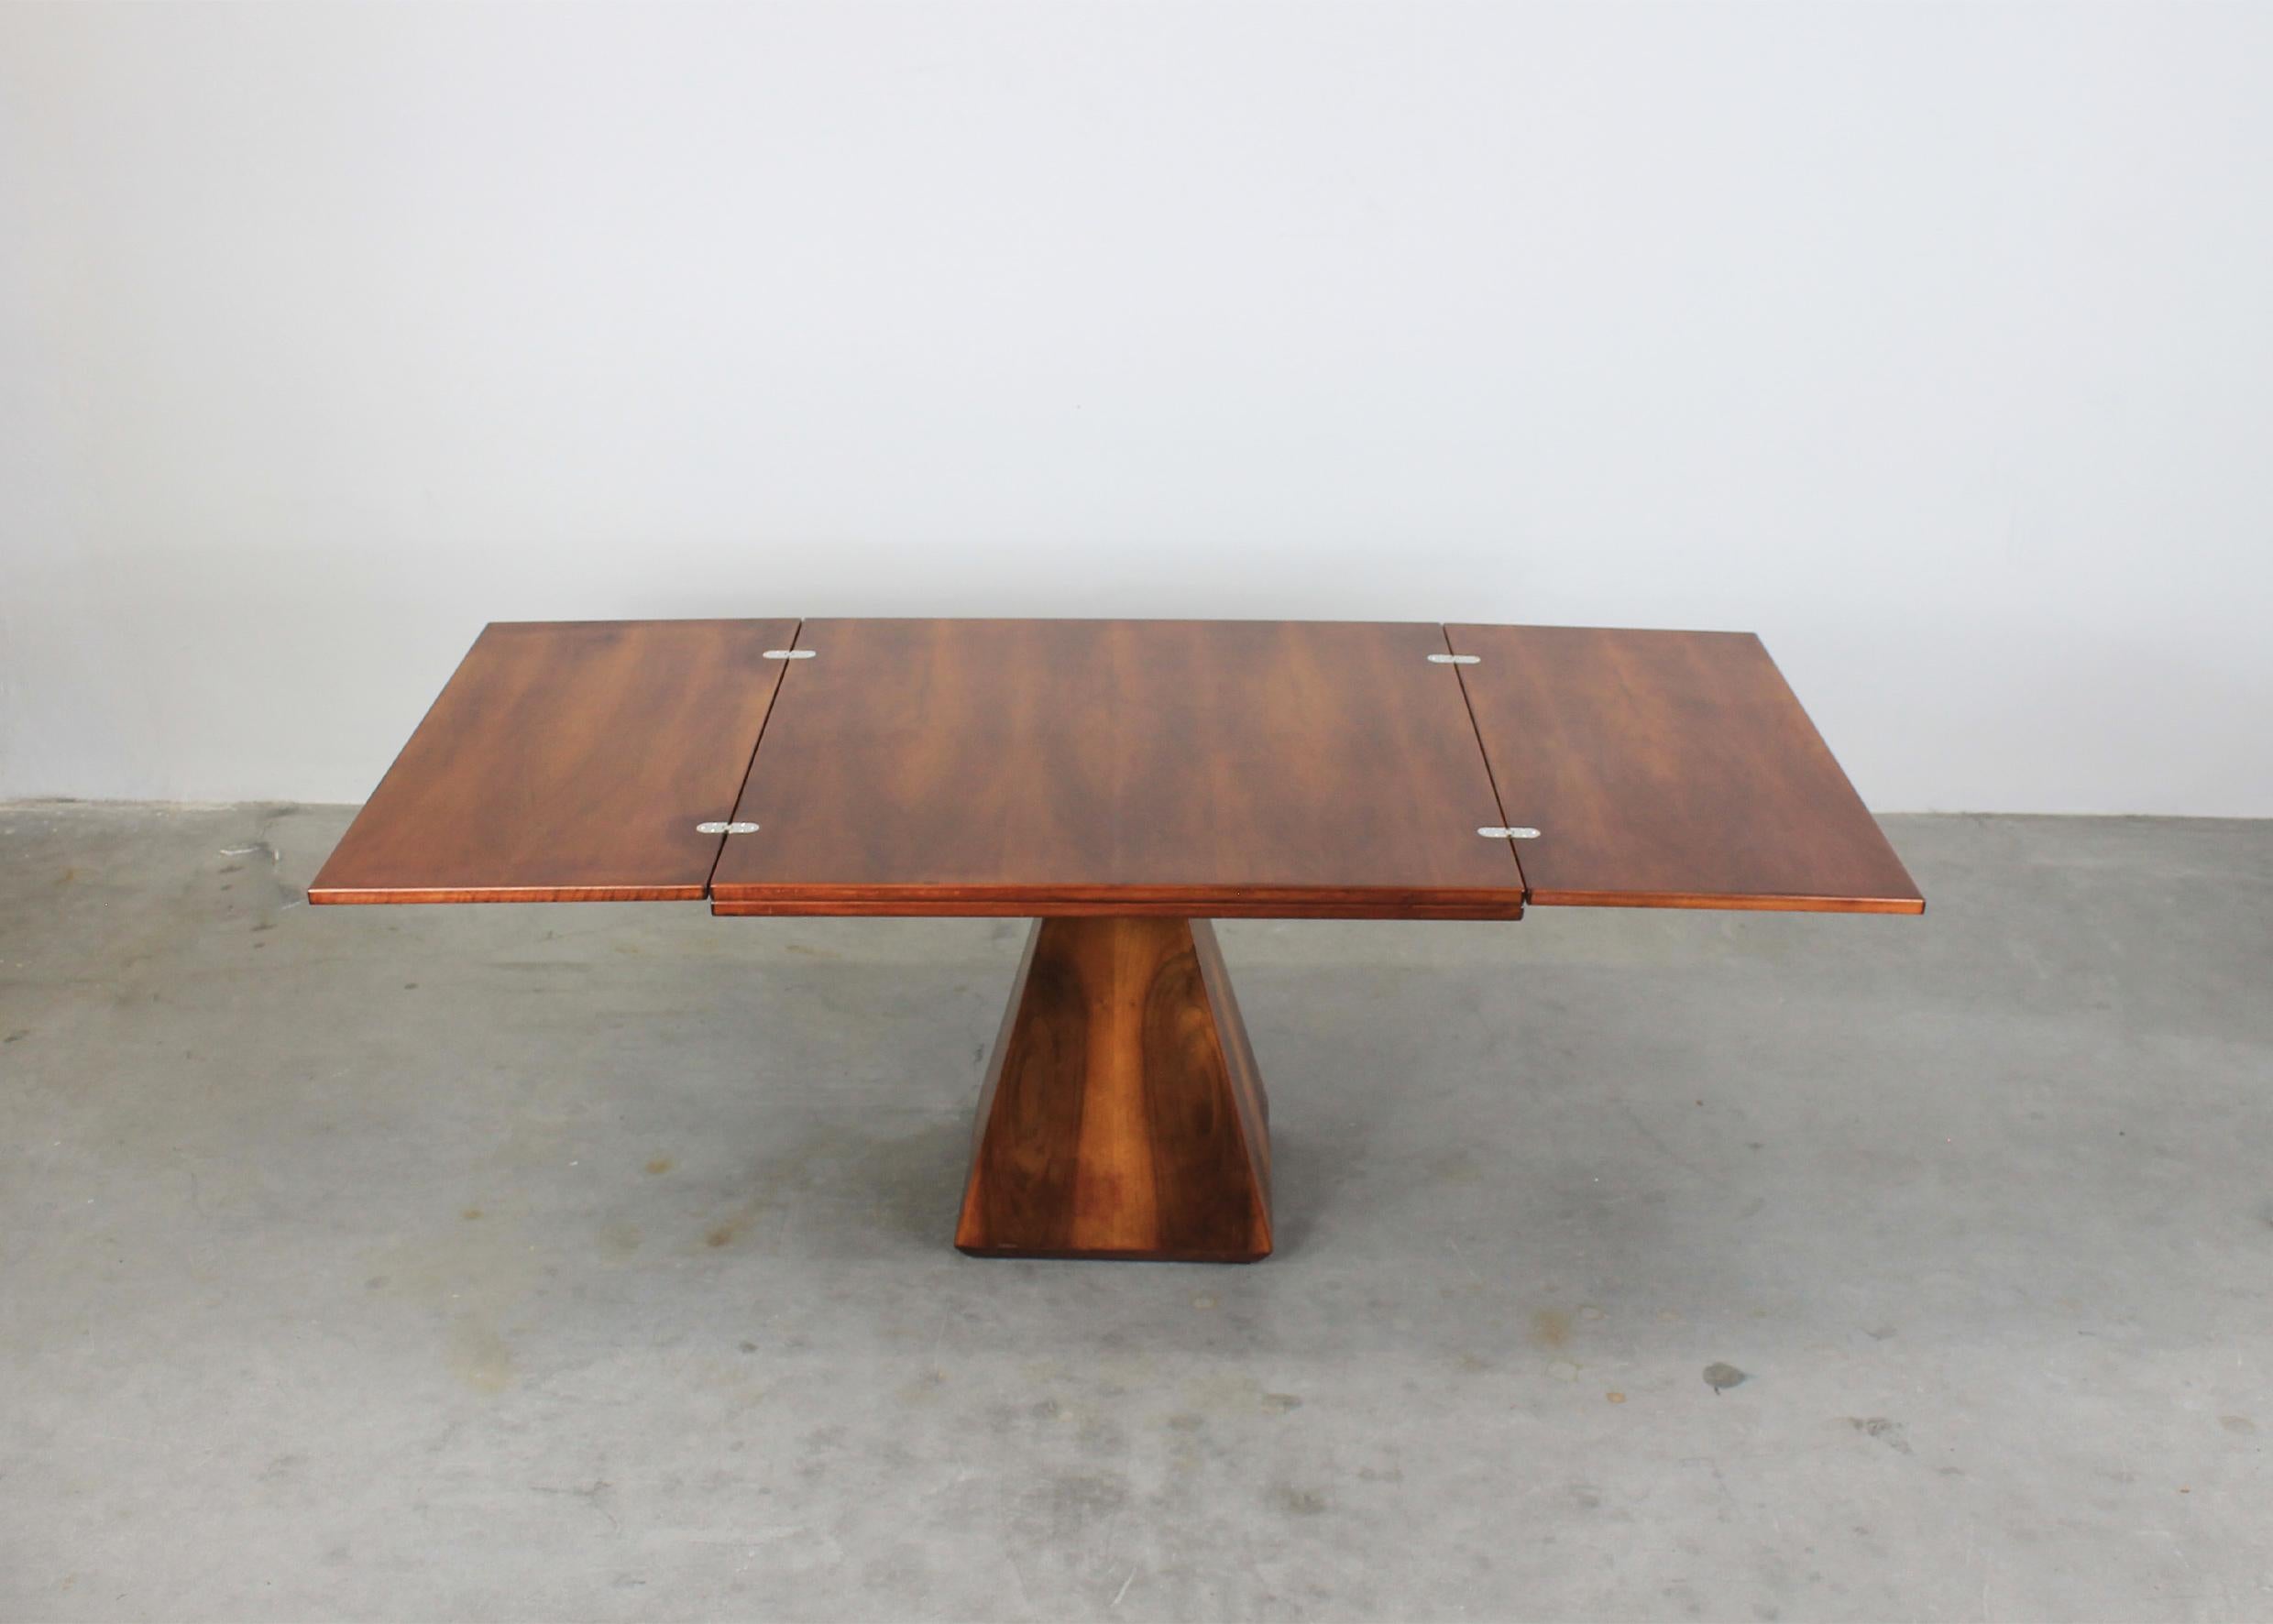 Other Vittorio Introini Chelsea Extendable Table in Walnut Wood by Saporiti 1960s For Sale